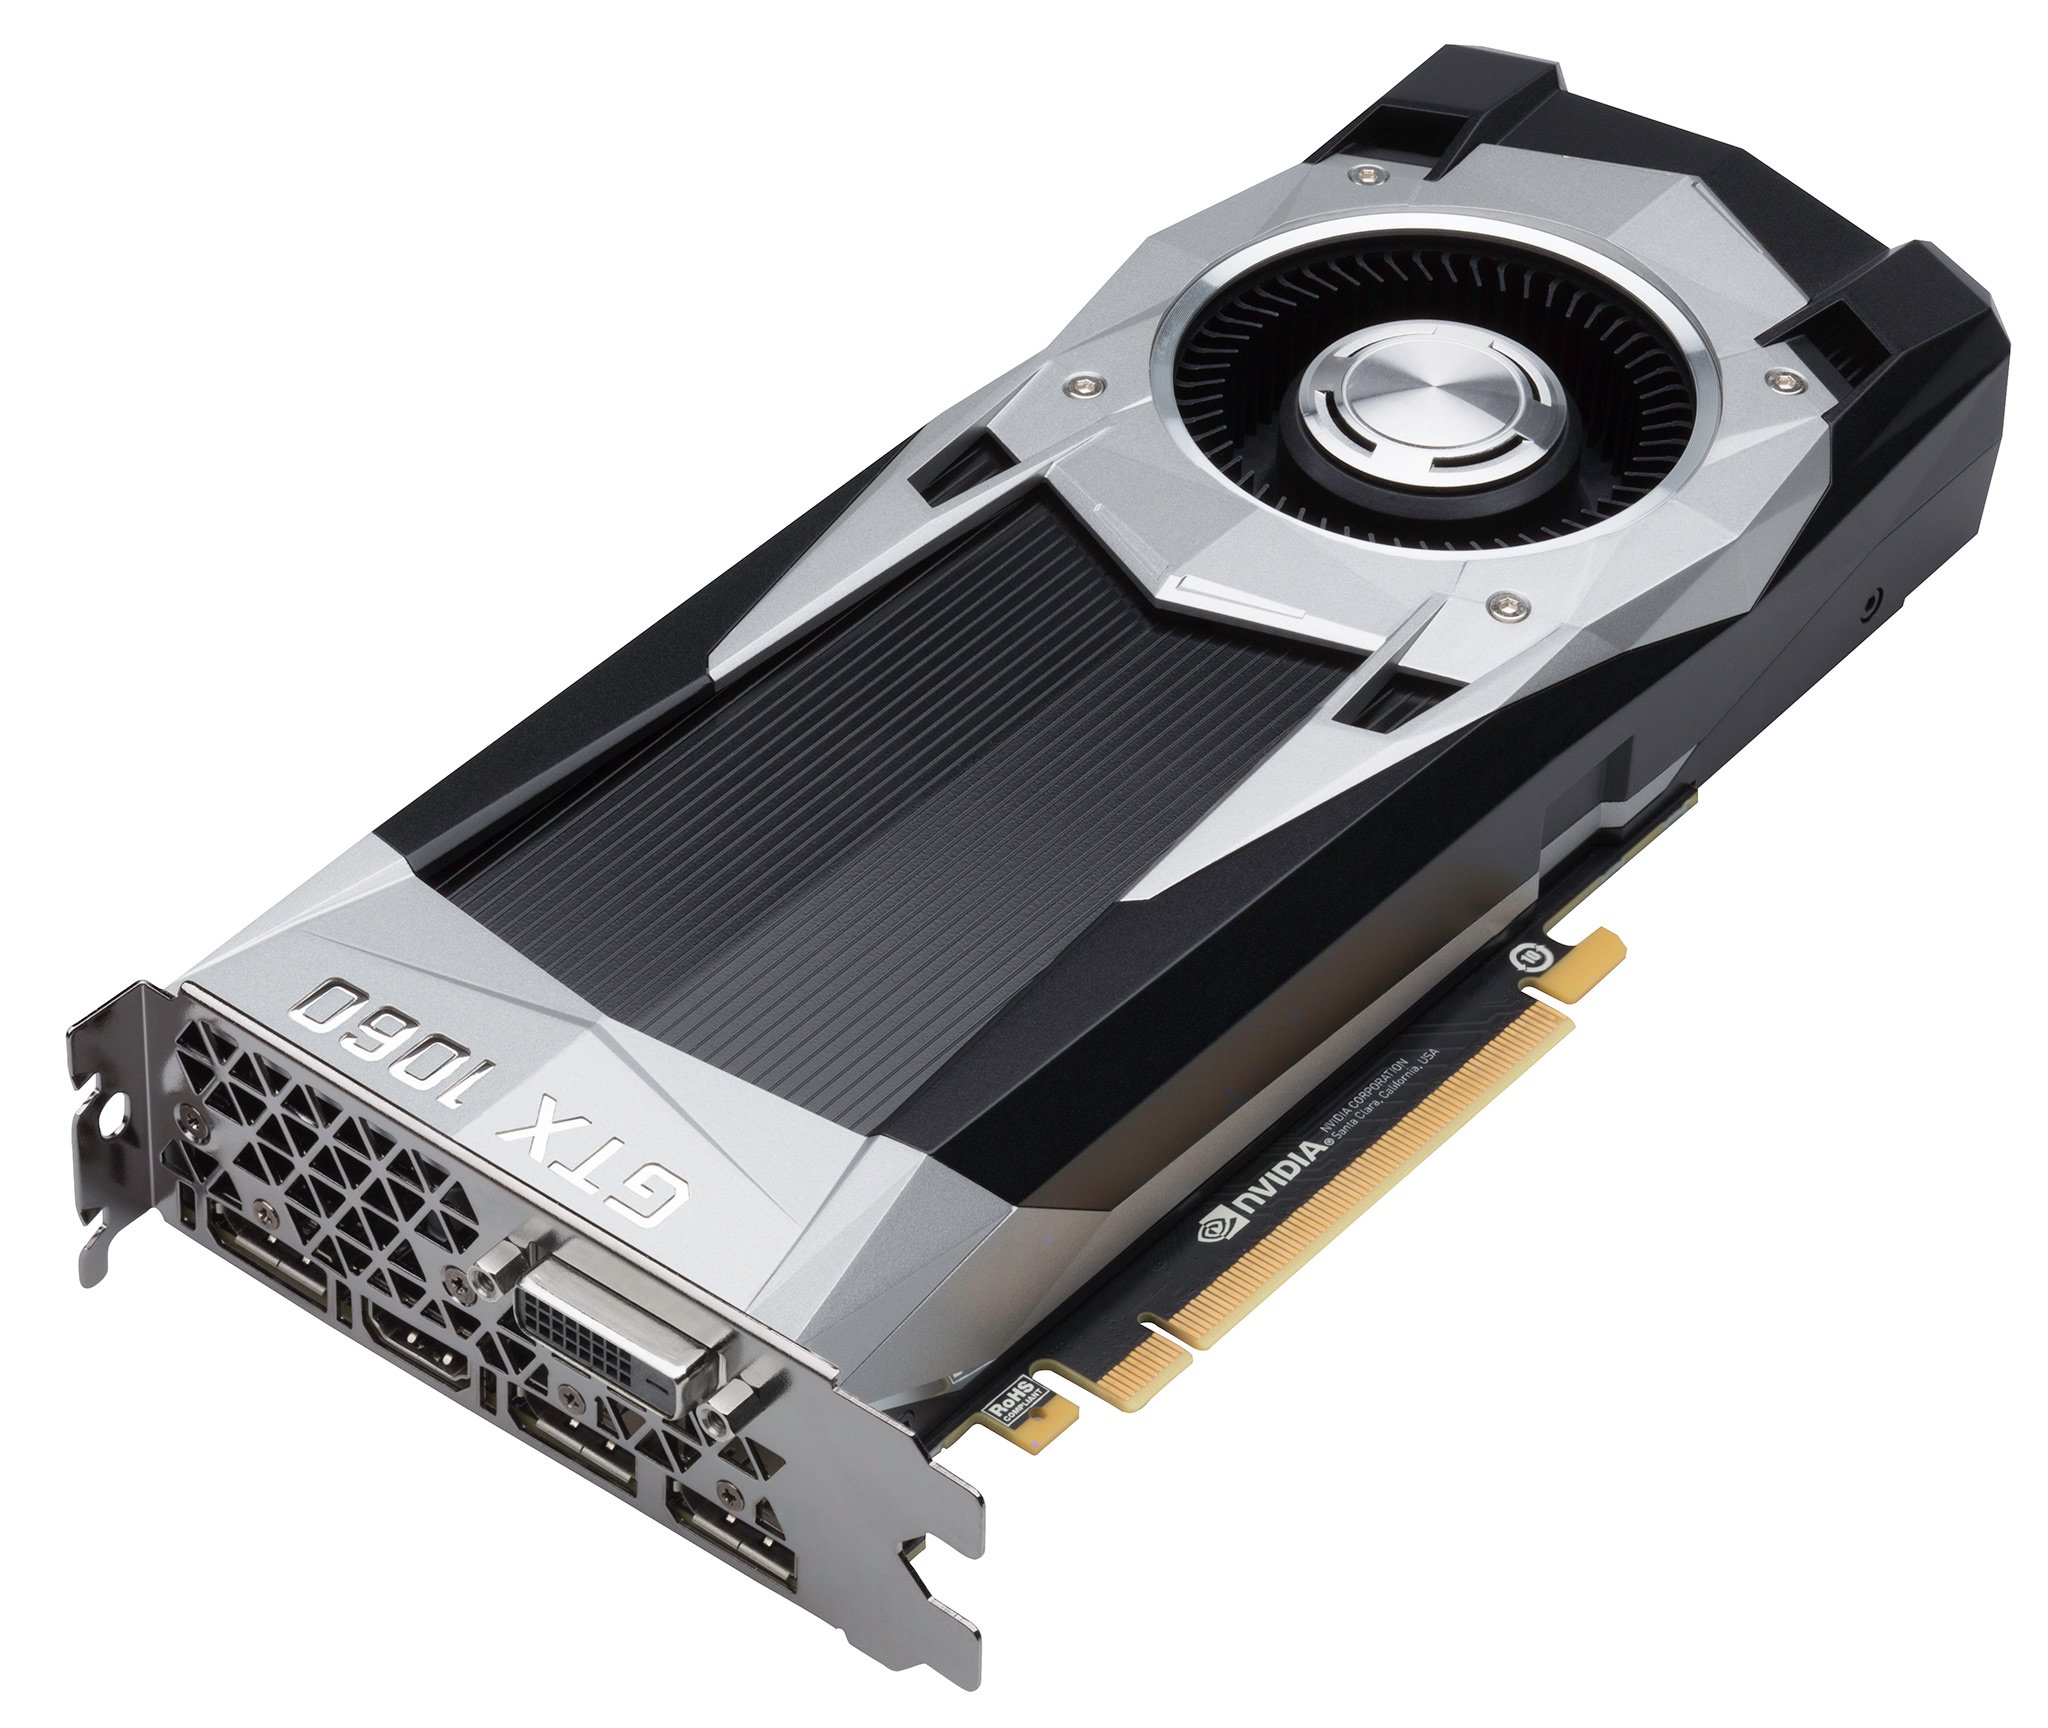 Nvidia S Gtx 1060 Brings Vr Gaming To The Masses For 249 Windows Central